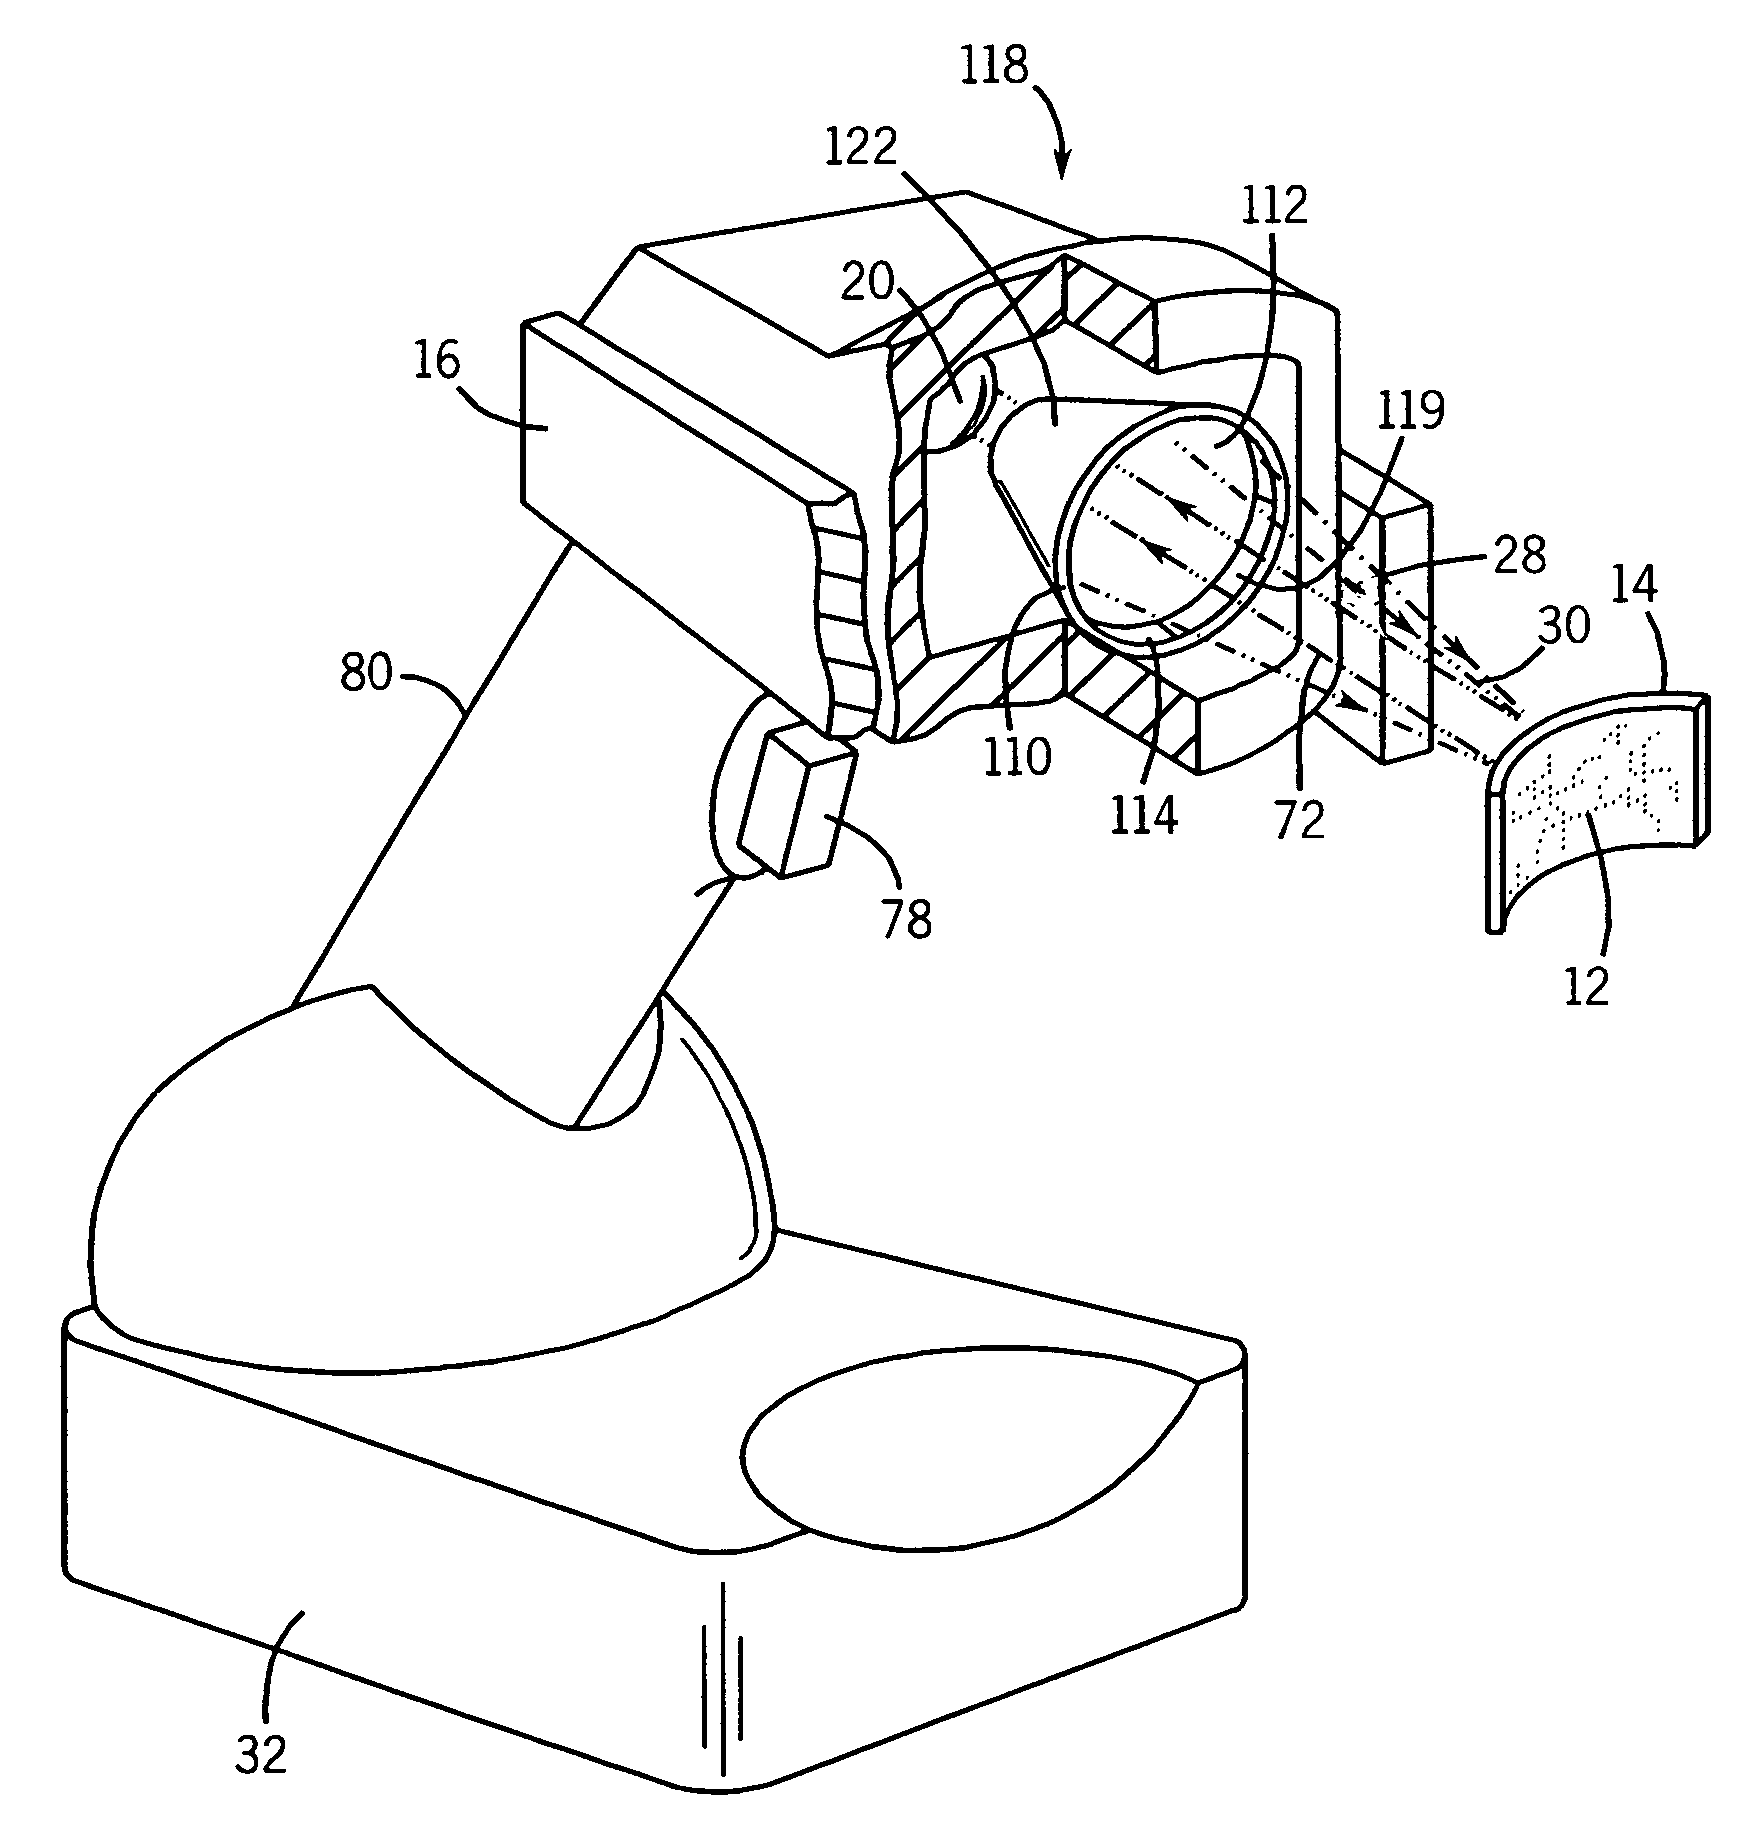 Illumination devices for image acquisition systems